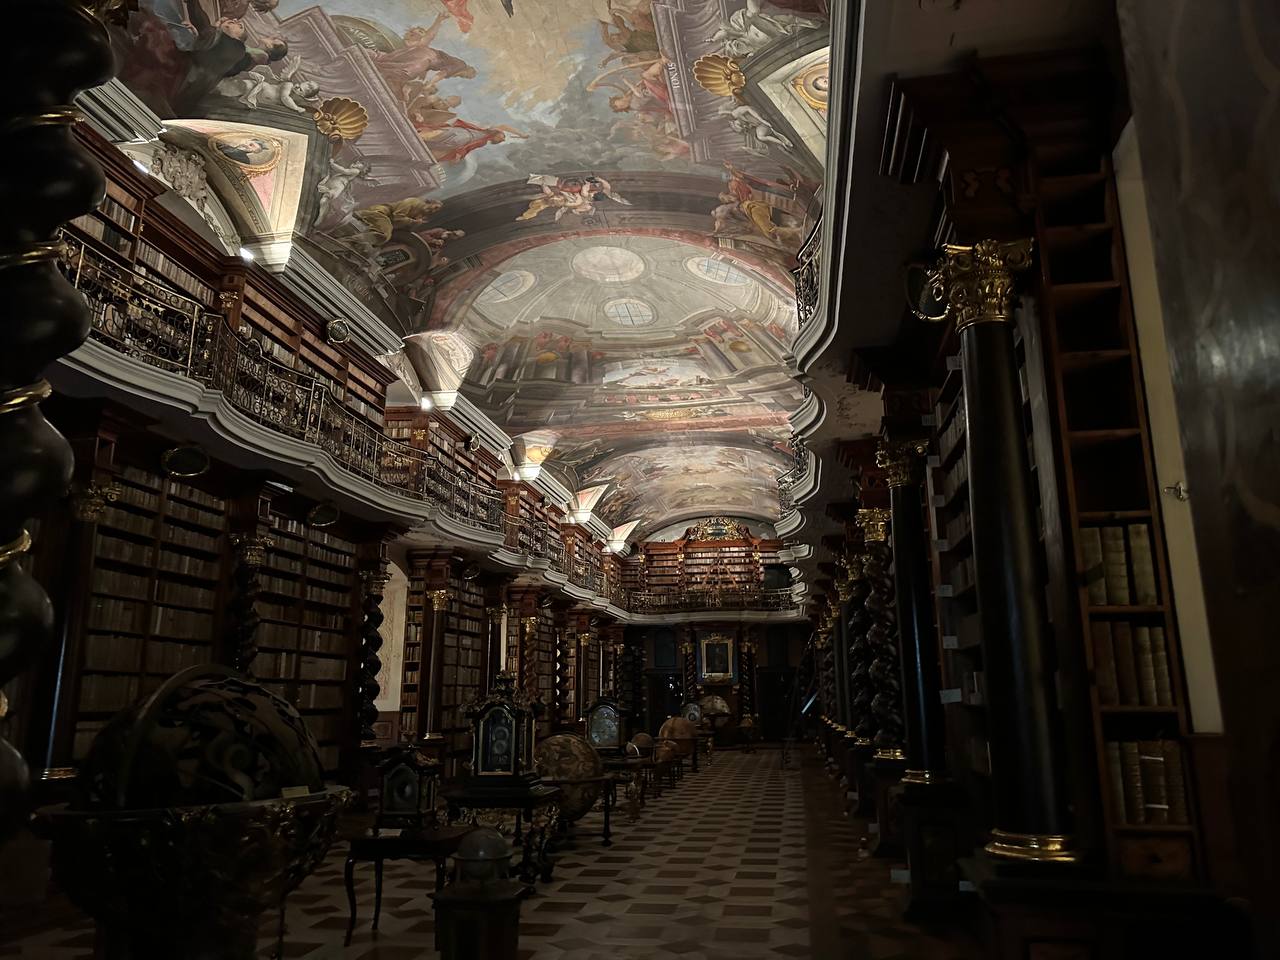 Inside the Baroque Library